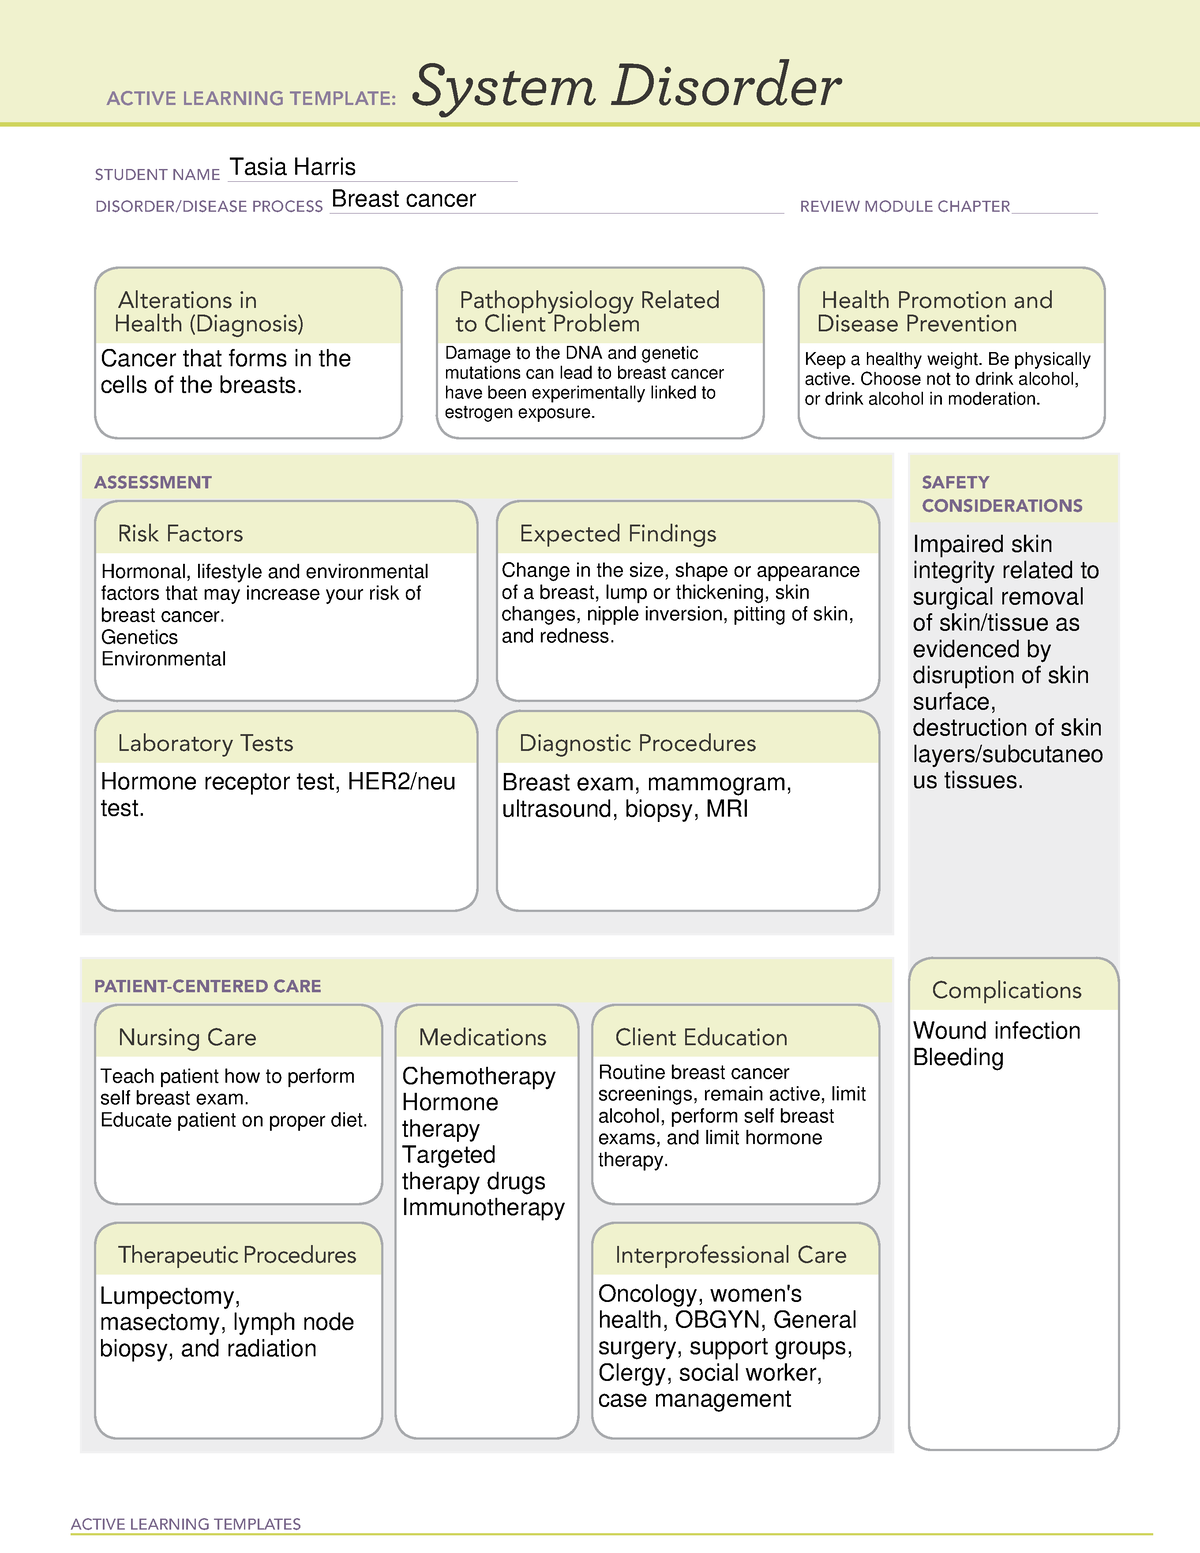 ATI System Disorder Template breast cancer - ACTIVE LEARNING TEMPLATES ...